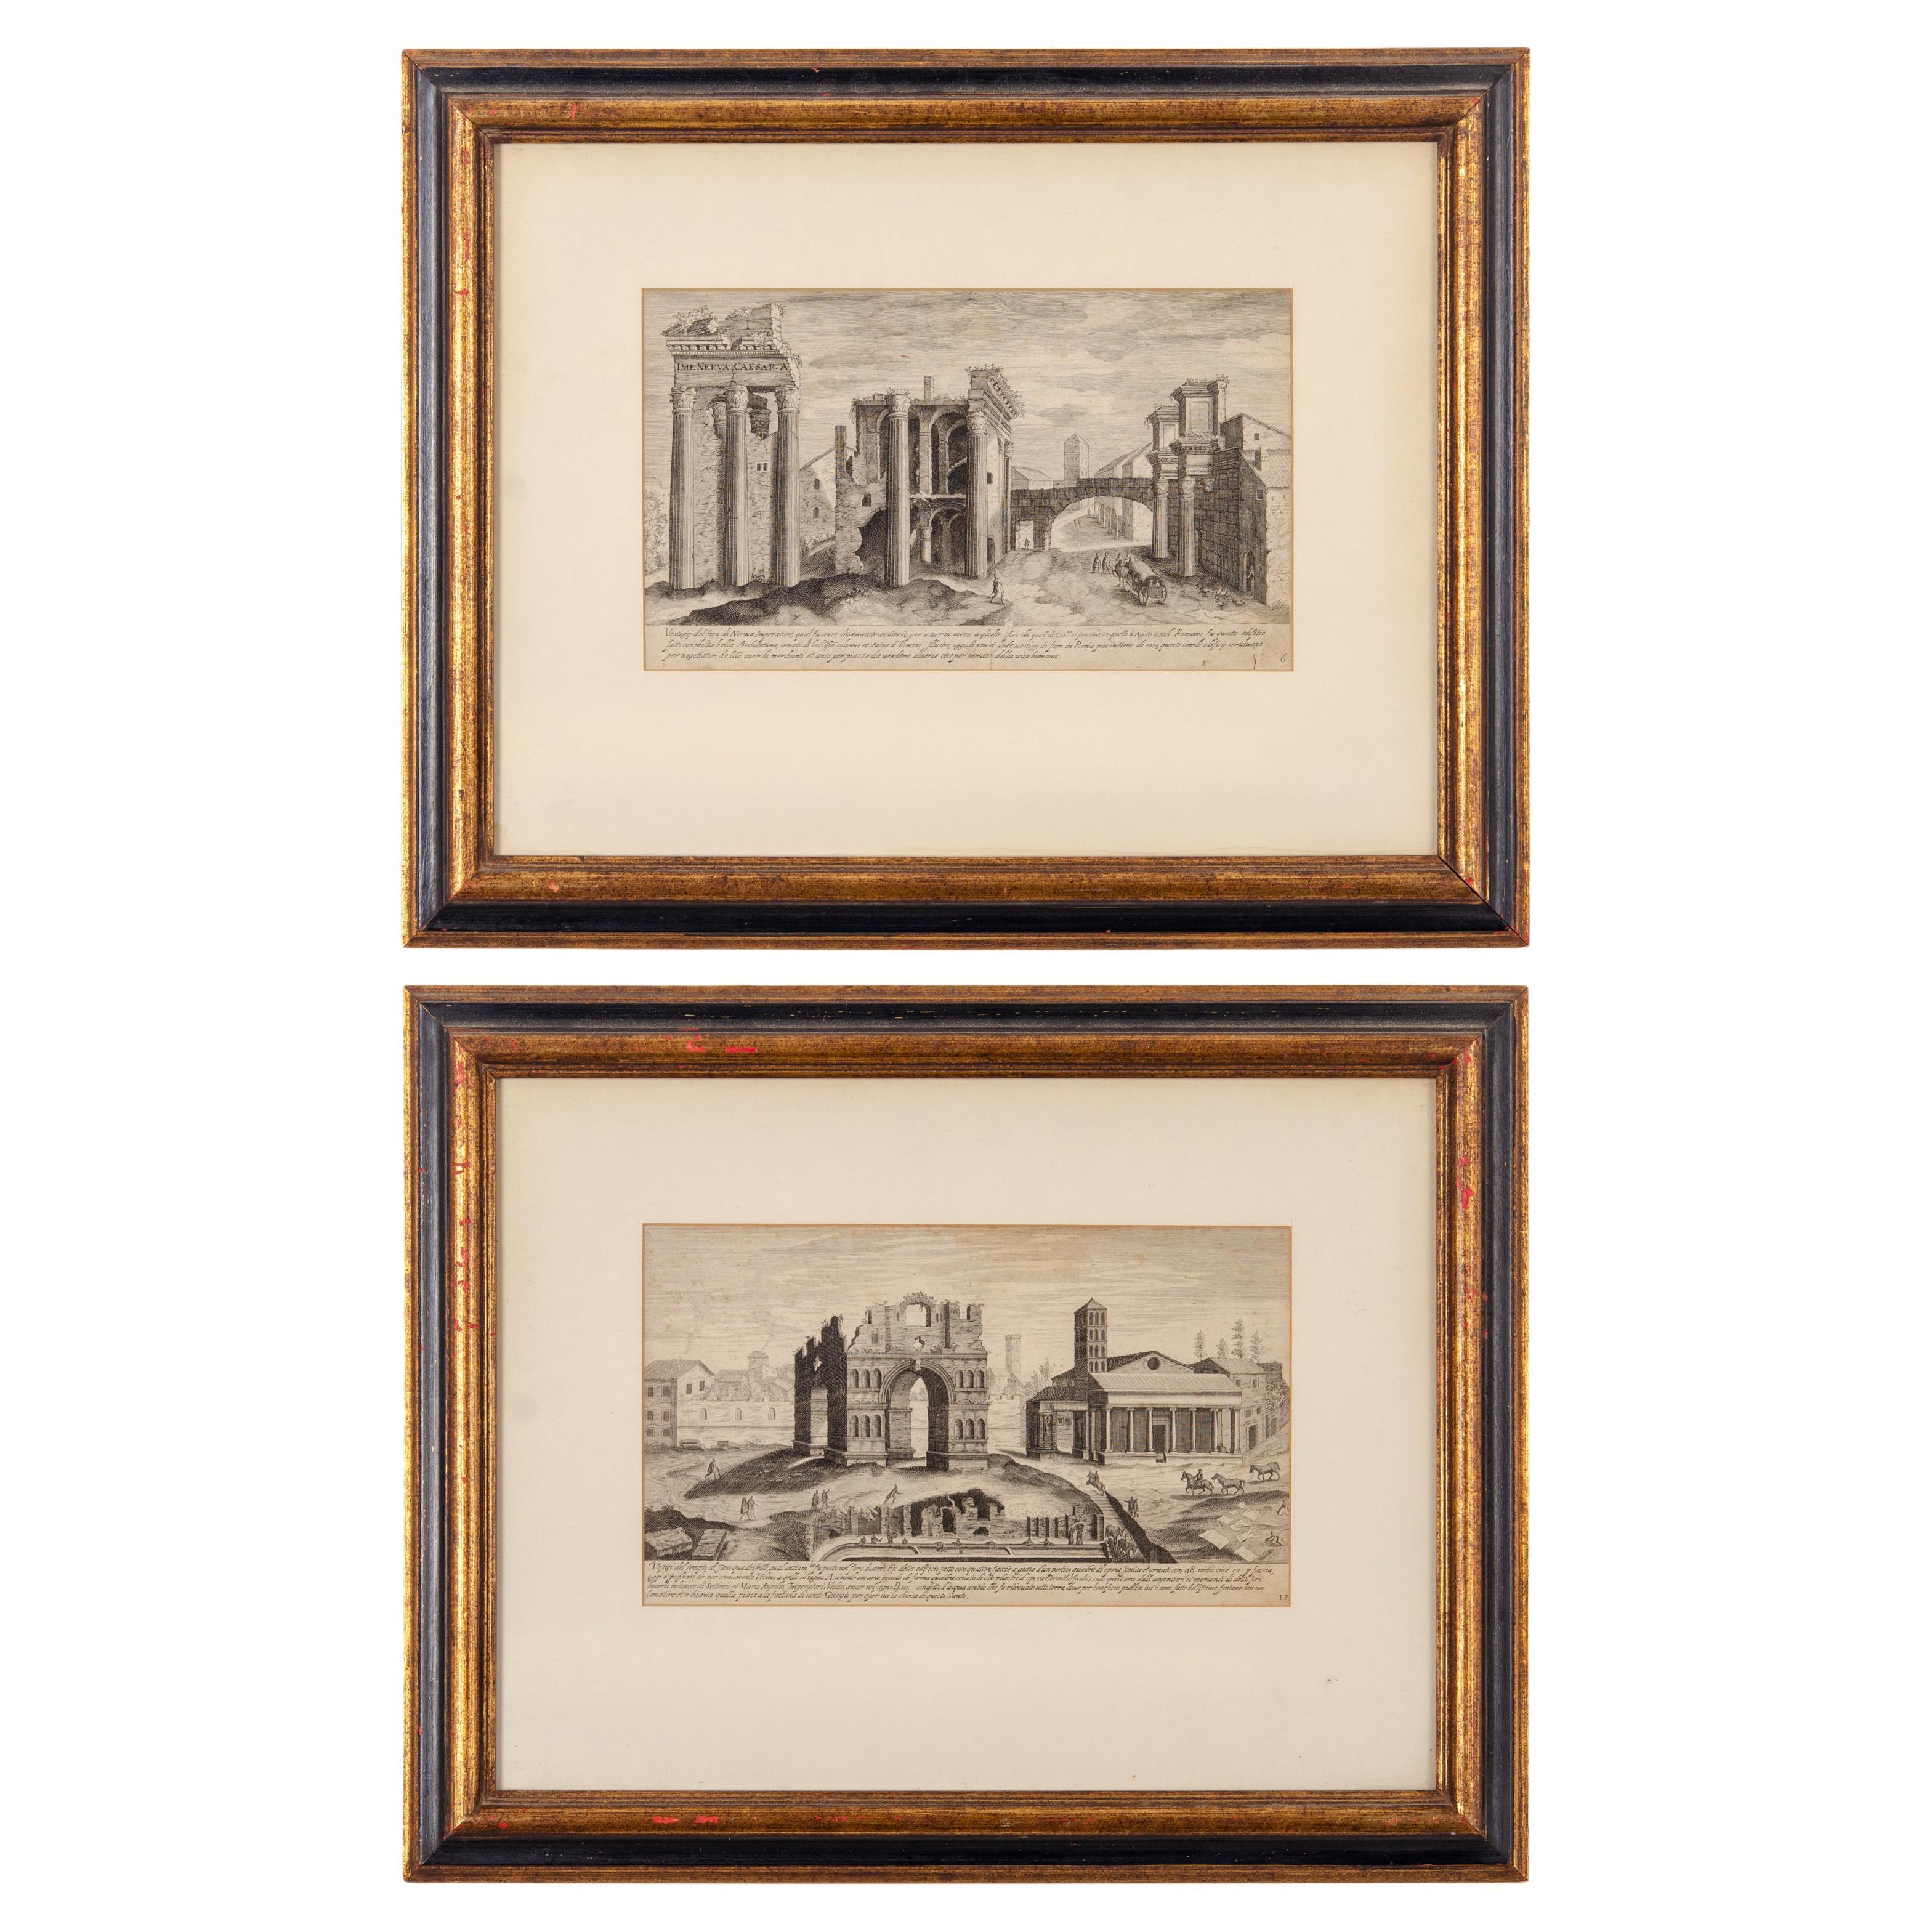 Étienne Dupérac Etchings of Ancient Roman Ruins, 17th Century - A Pair For Sale